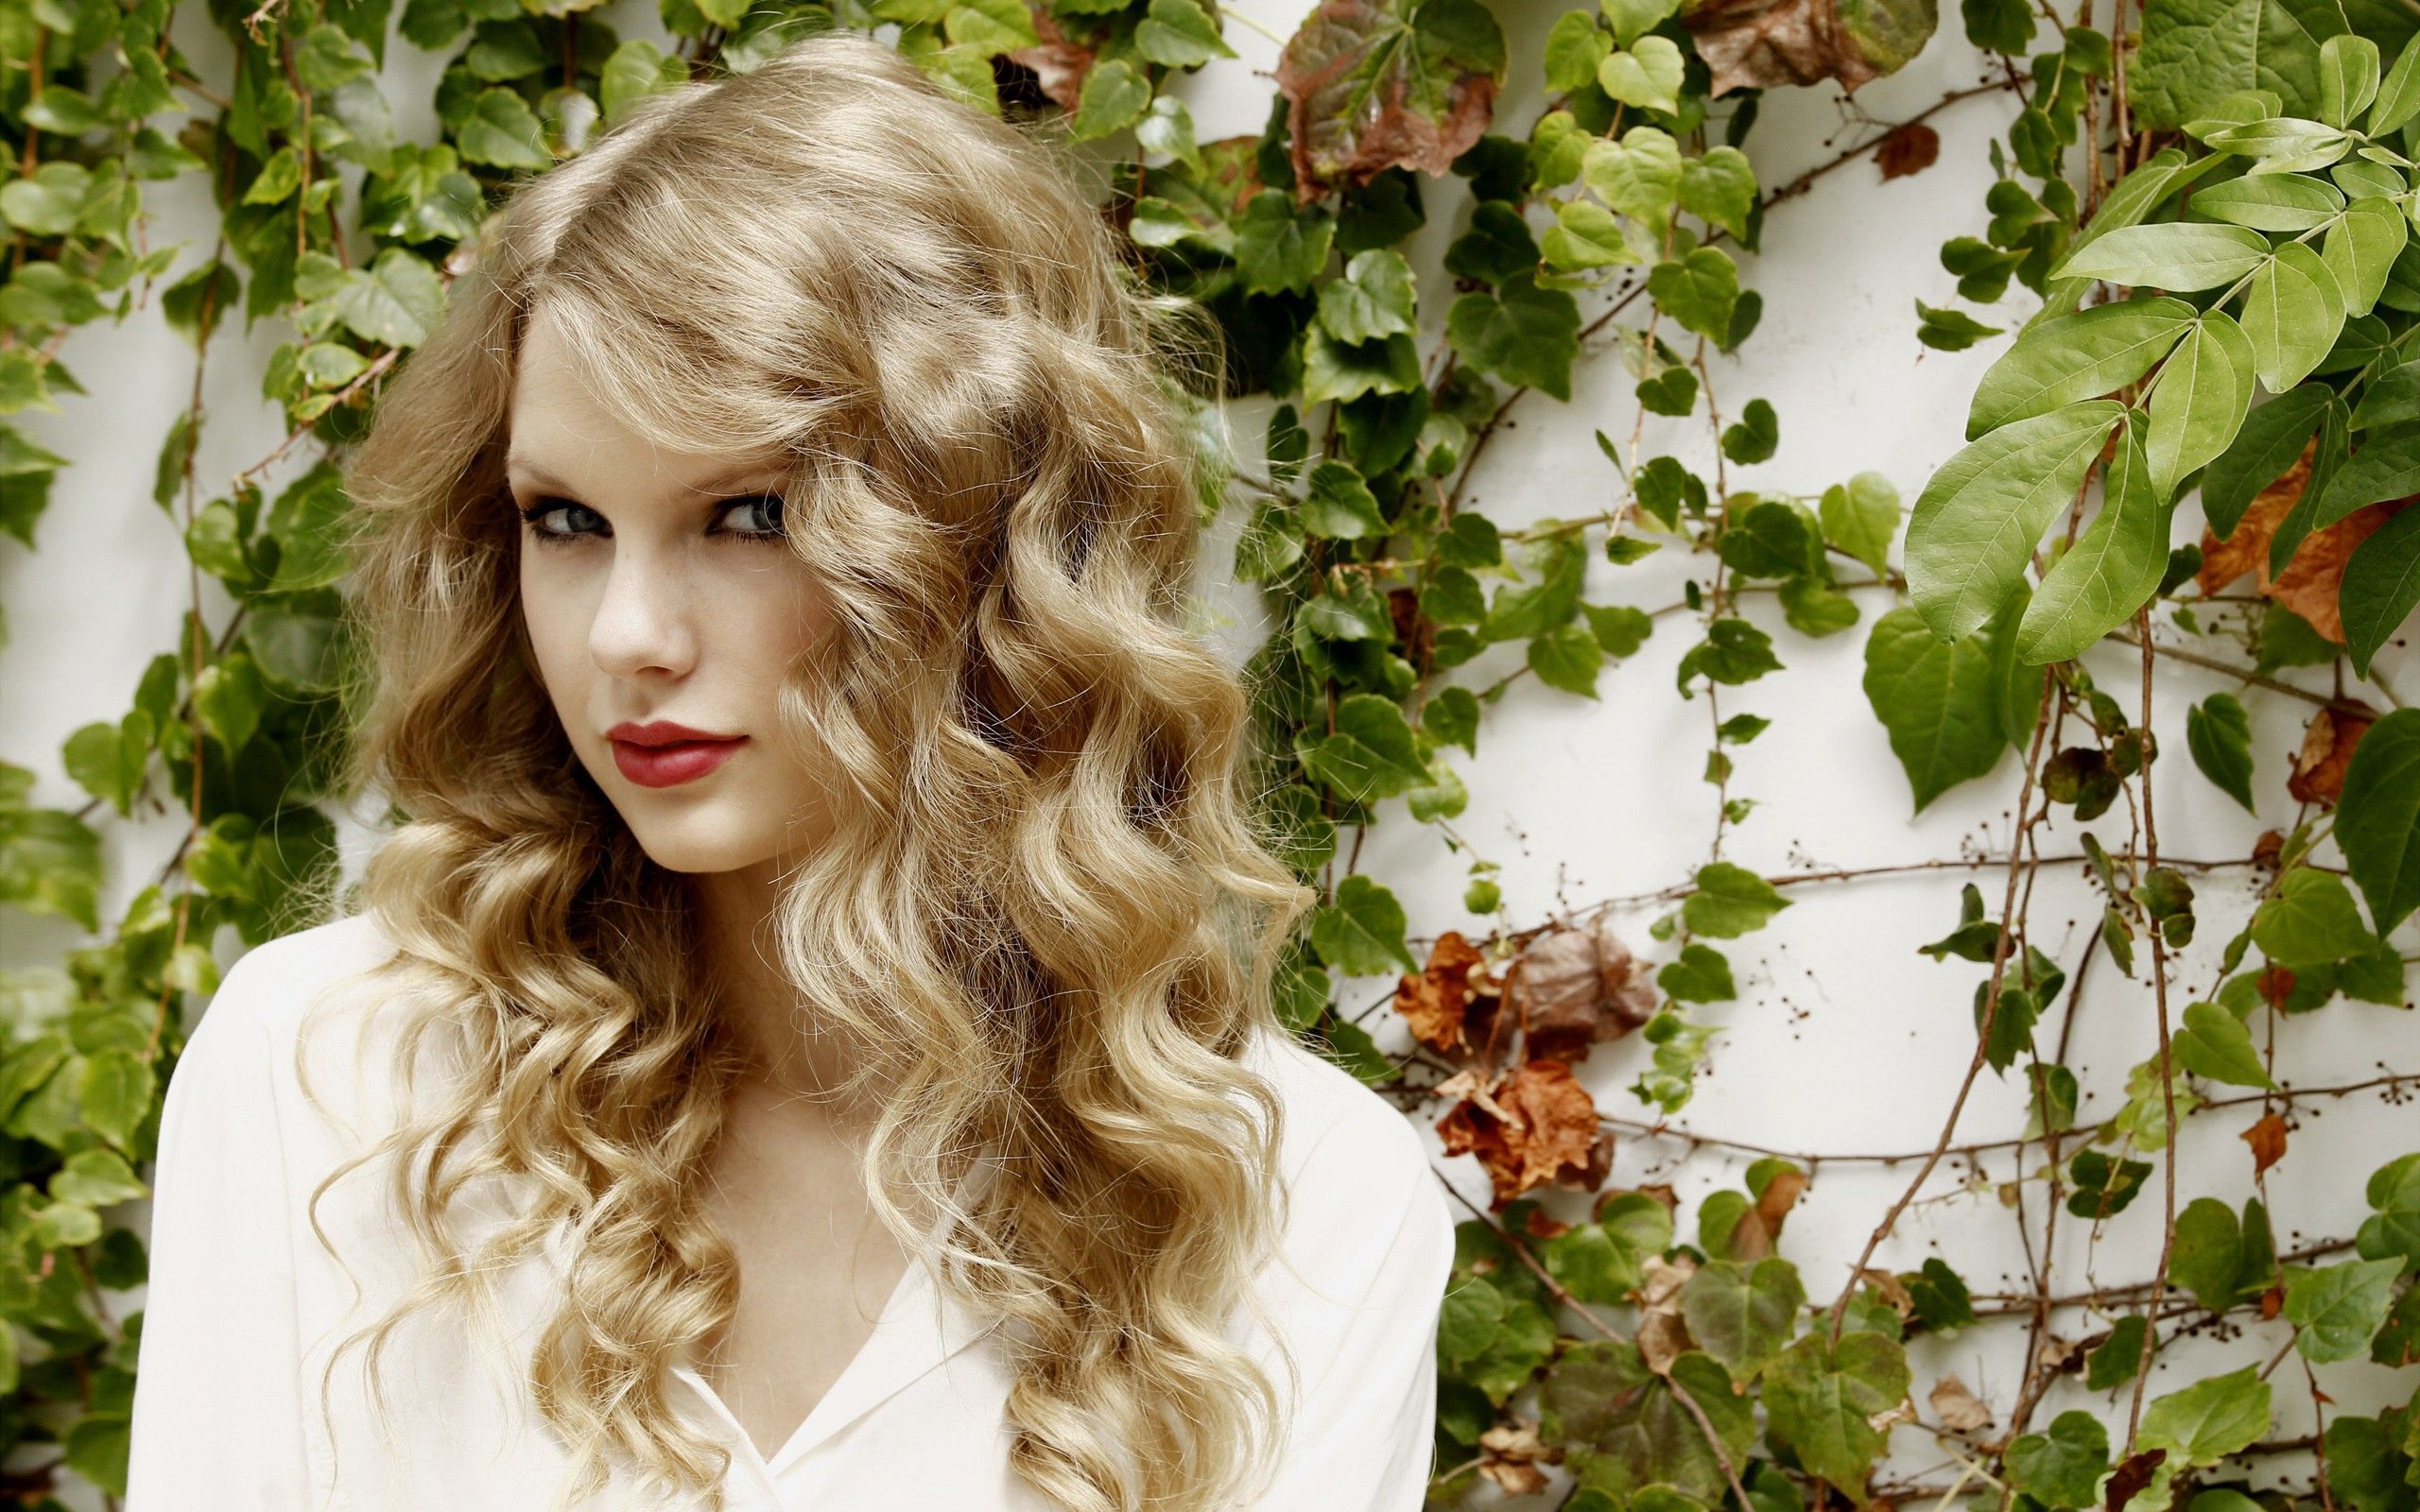 Taylor Swift Wallpaper HD Images Wallpapers, Backgrounds, Images